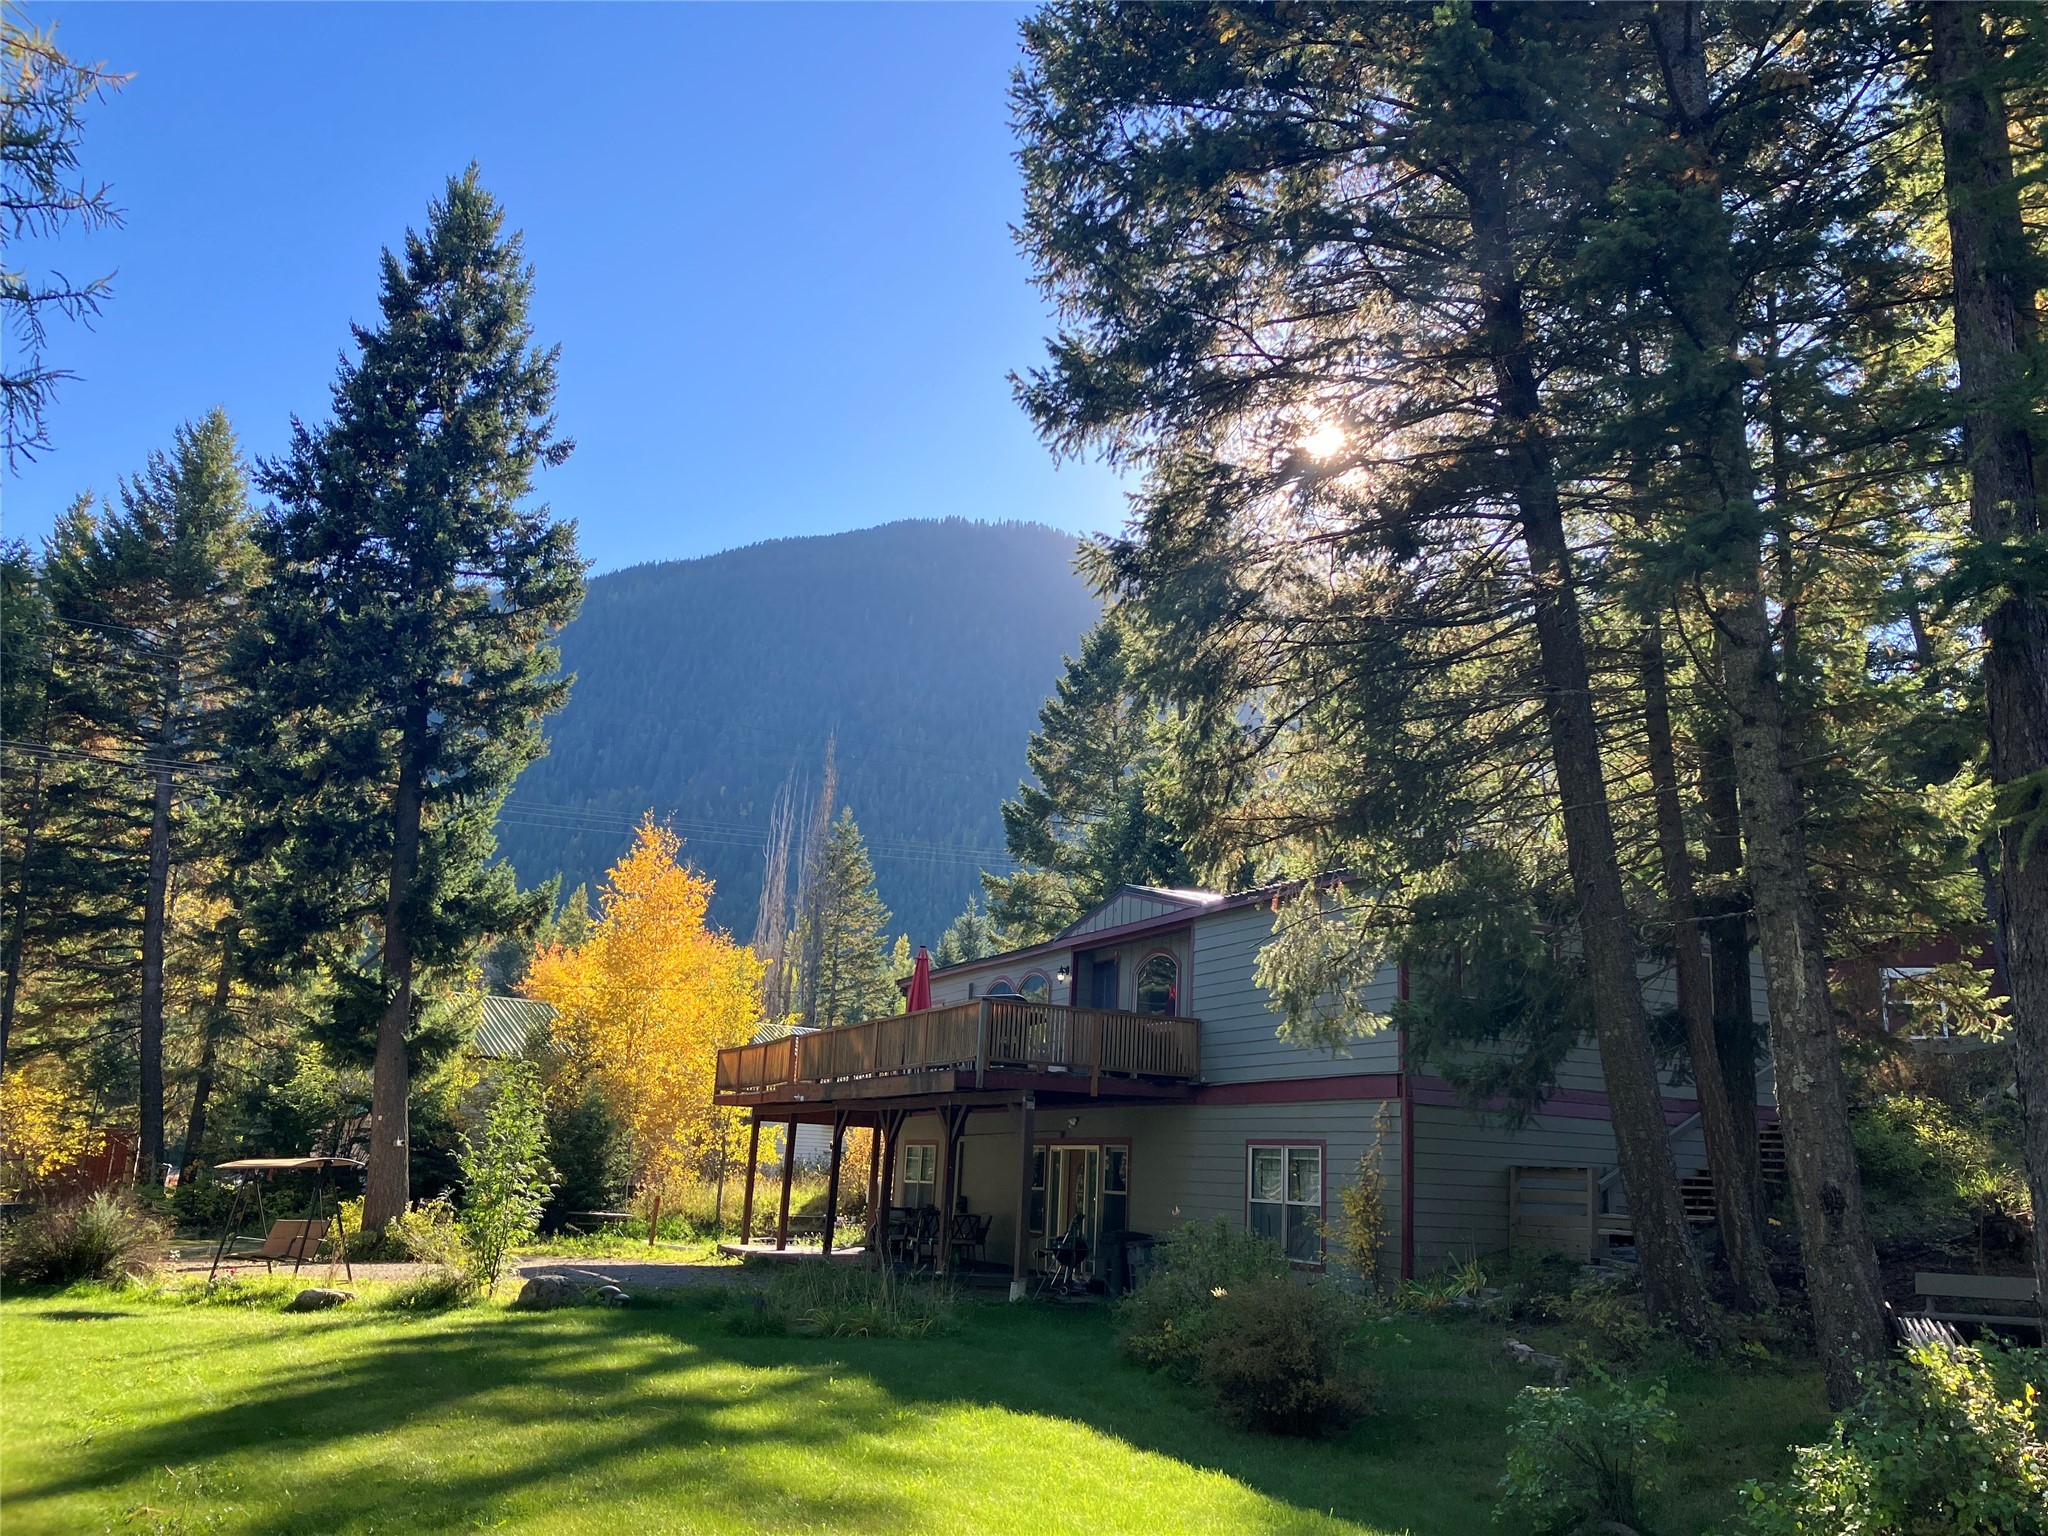 This two unit home is located just over 10 miles from Glacier Nat'l Park. The property is over a 1/2 acre and has lots to offer, with a lower 2 bedroom/2 bath unit accessed from the alley driveway and an upper 3 bed/2 bath unit. Both units have laundry and kitchens. There is also a spot for an RV with hookups. On the upper deck is a hot tub and a built-in storage area. Two ensuite bedrooms with walk-in closets, large rooms and lots of space outdoors. Only a short distance to the Flathead River and Hungry Horse Reservoir. Call Jamie Foster 406-309-0688 or your real estate professional for more information.